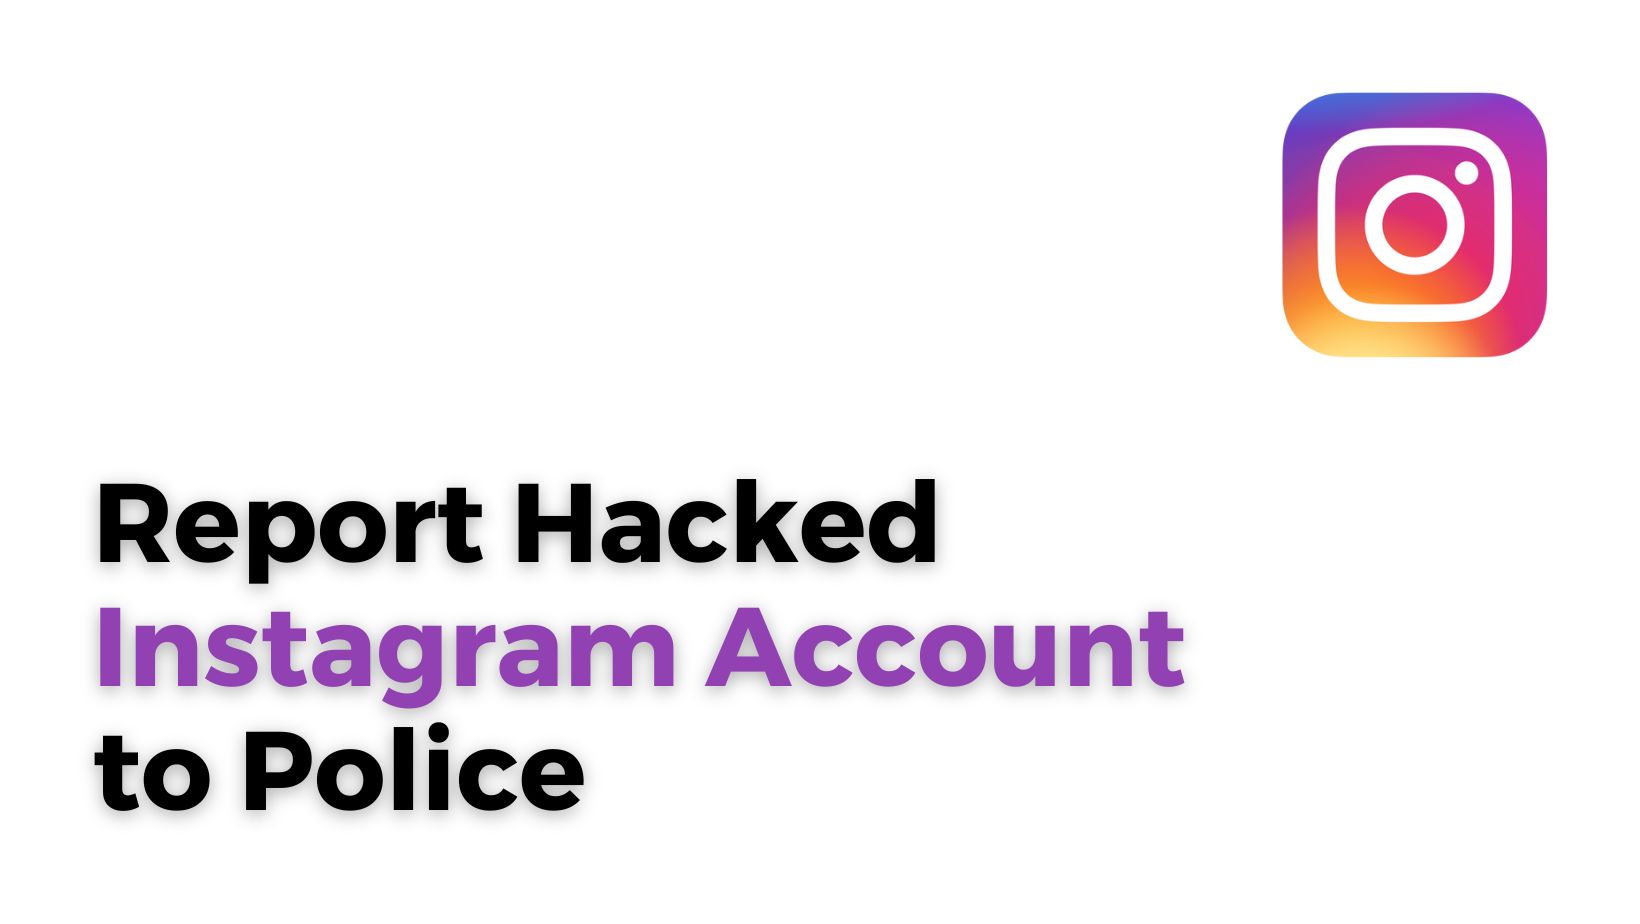 Report Hacked Instagram Account to Police